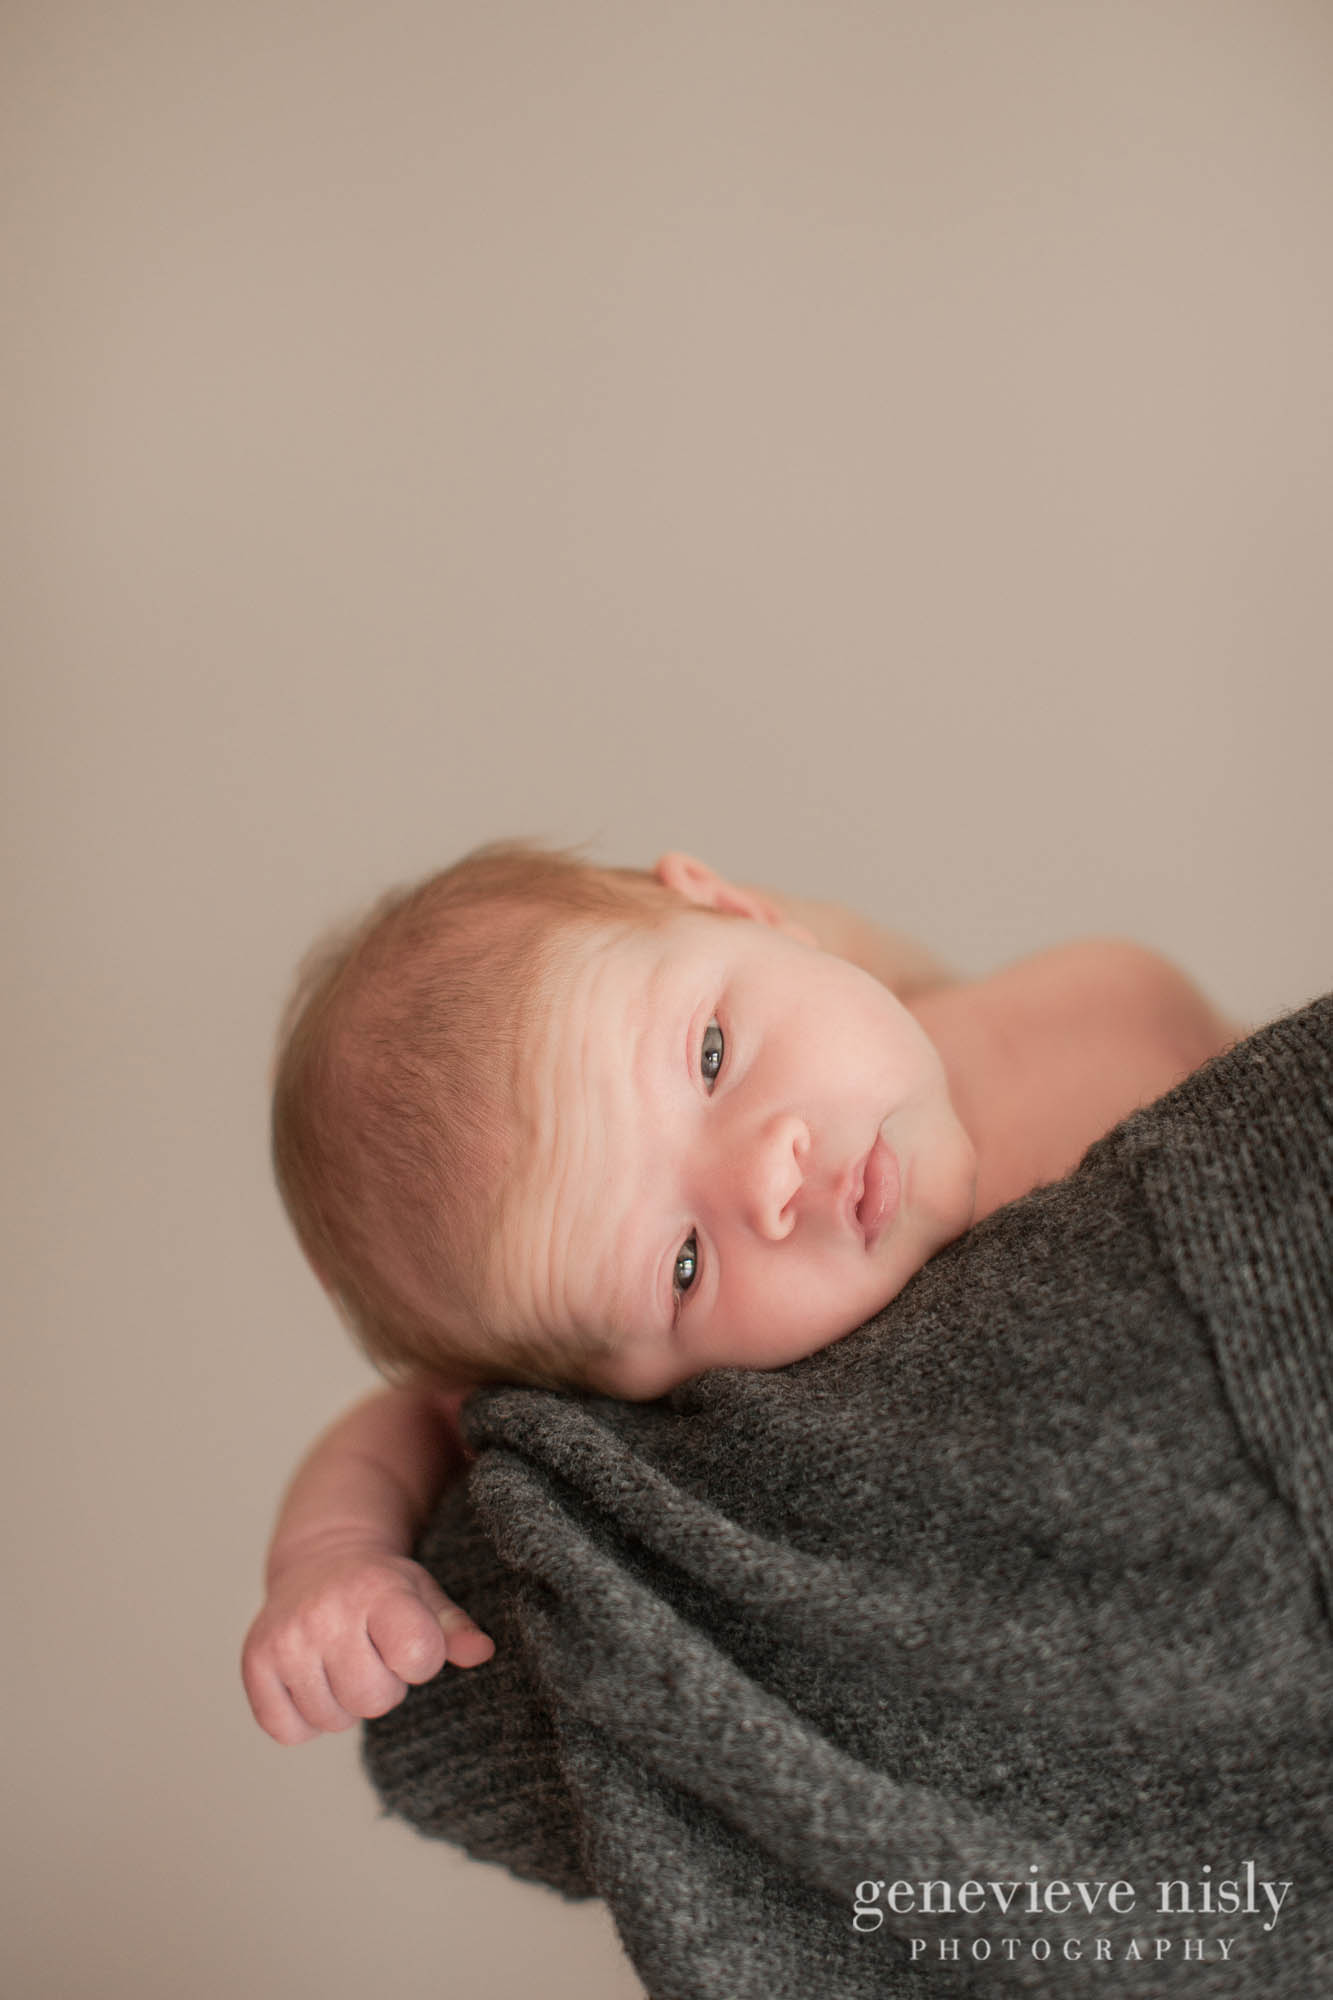  Baby, Copyright Genevieve Nisly Photography, Portraits, Summer